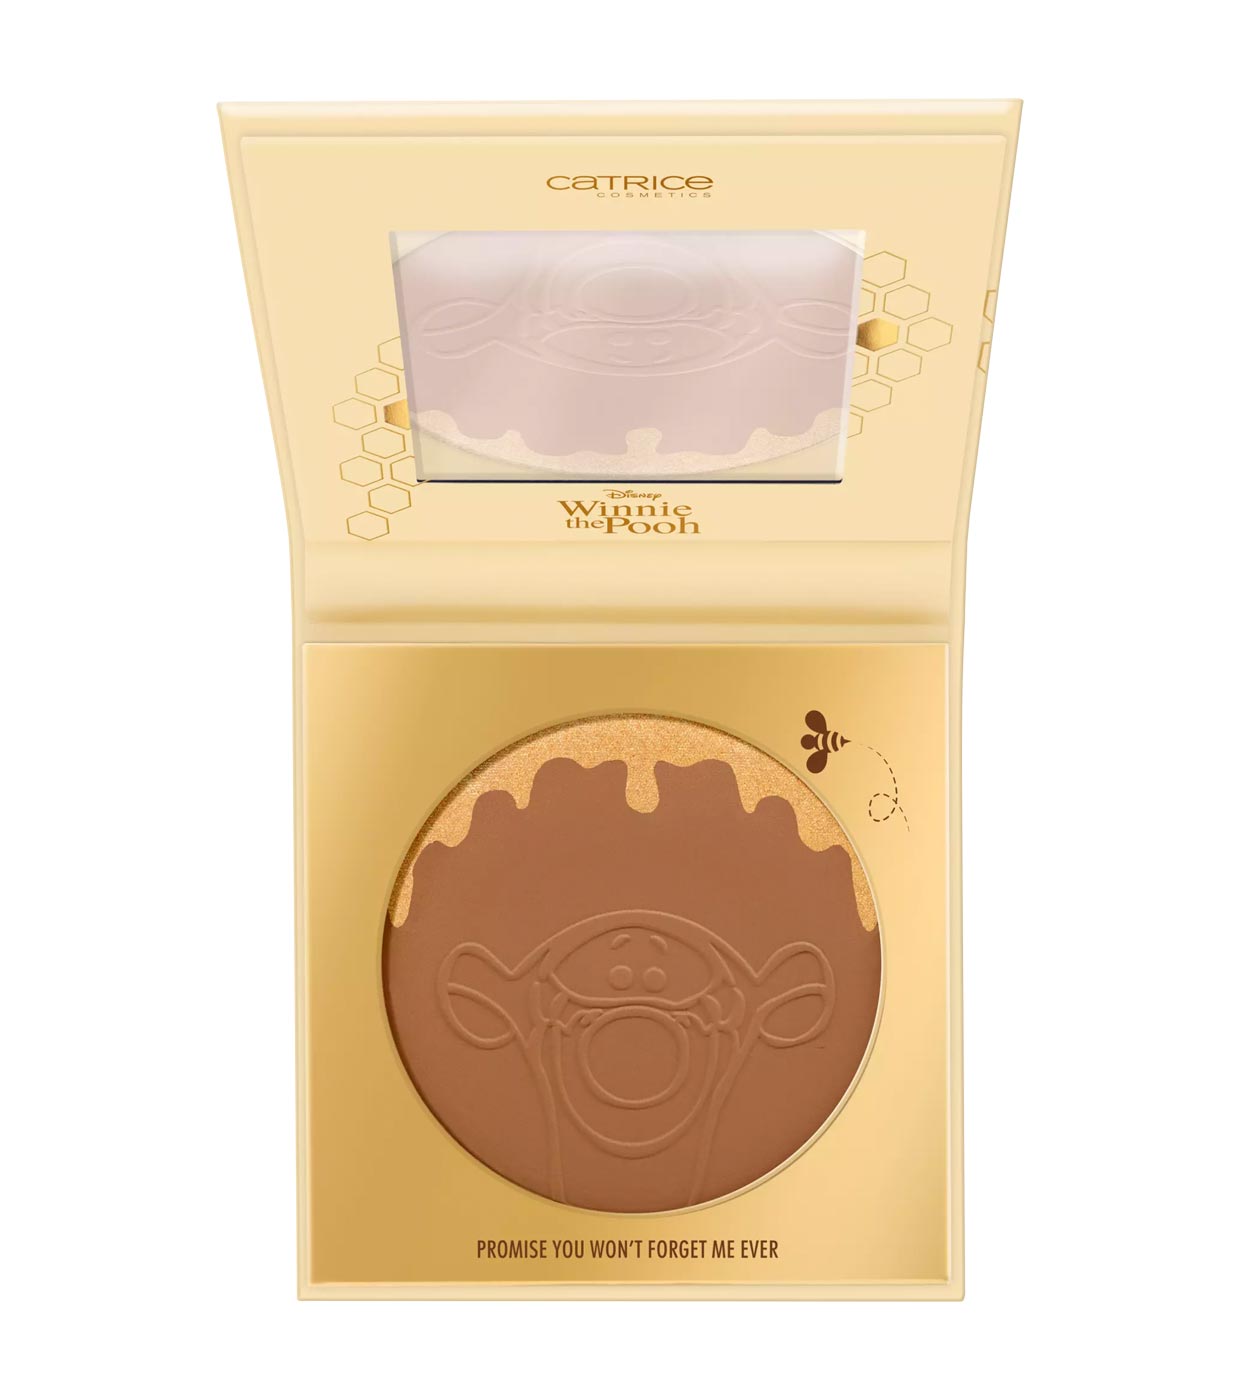 Buy Catrice - *Winnie Me | - Powder Subtle 020: Promise Forget - You Ever Maquillalia the Won\'t Bronzer Pooh* Shimmer